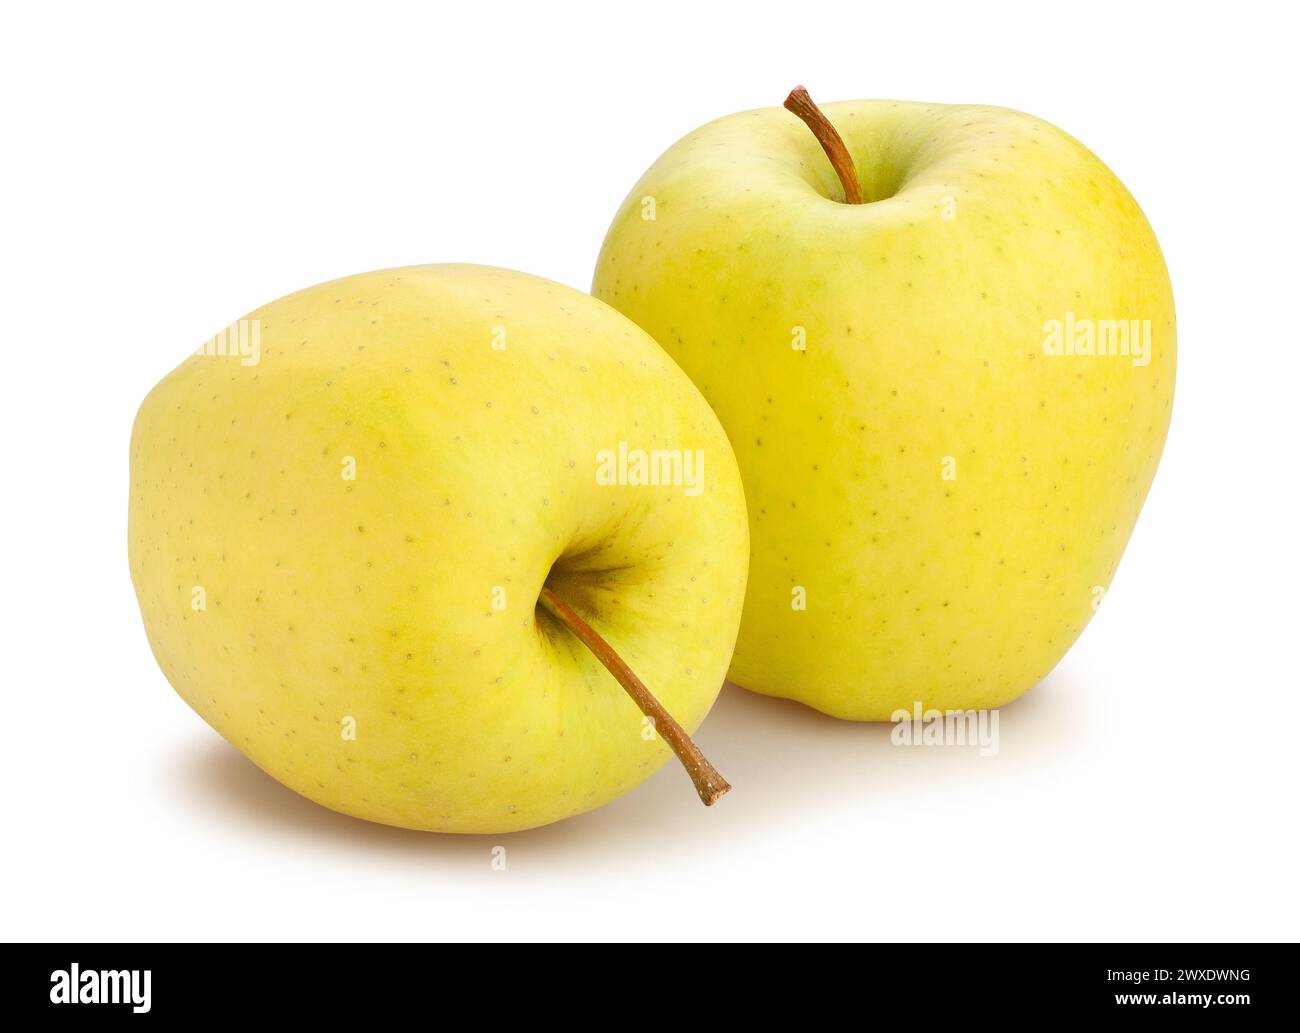 golden delicious apple path isolated on white Stock Photo